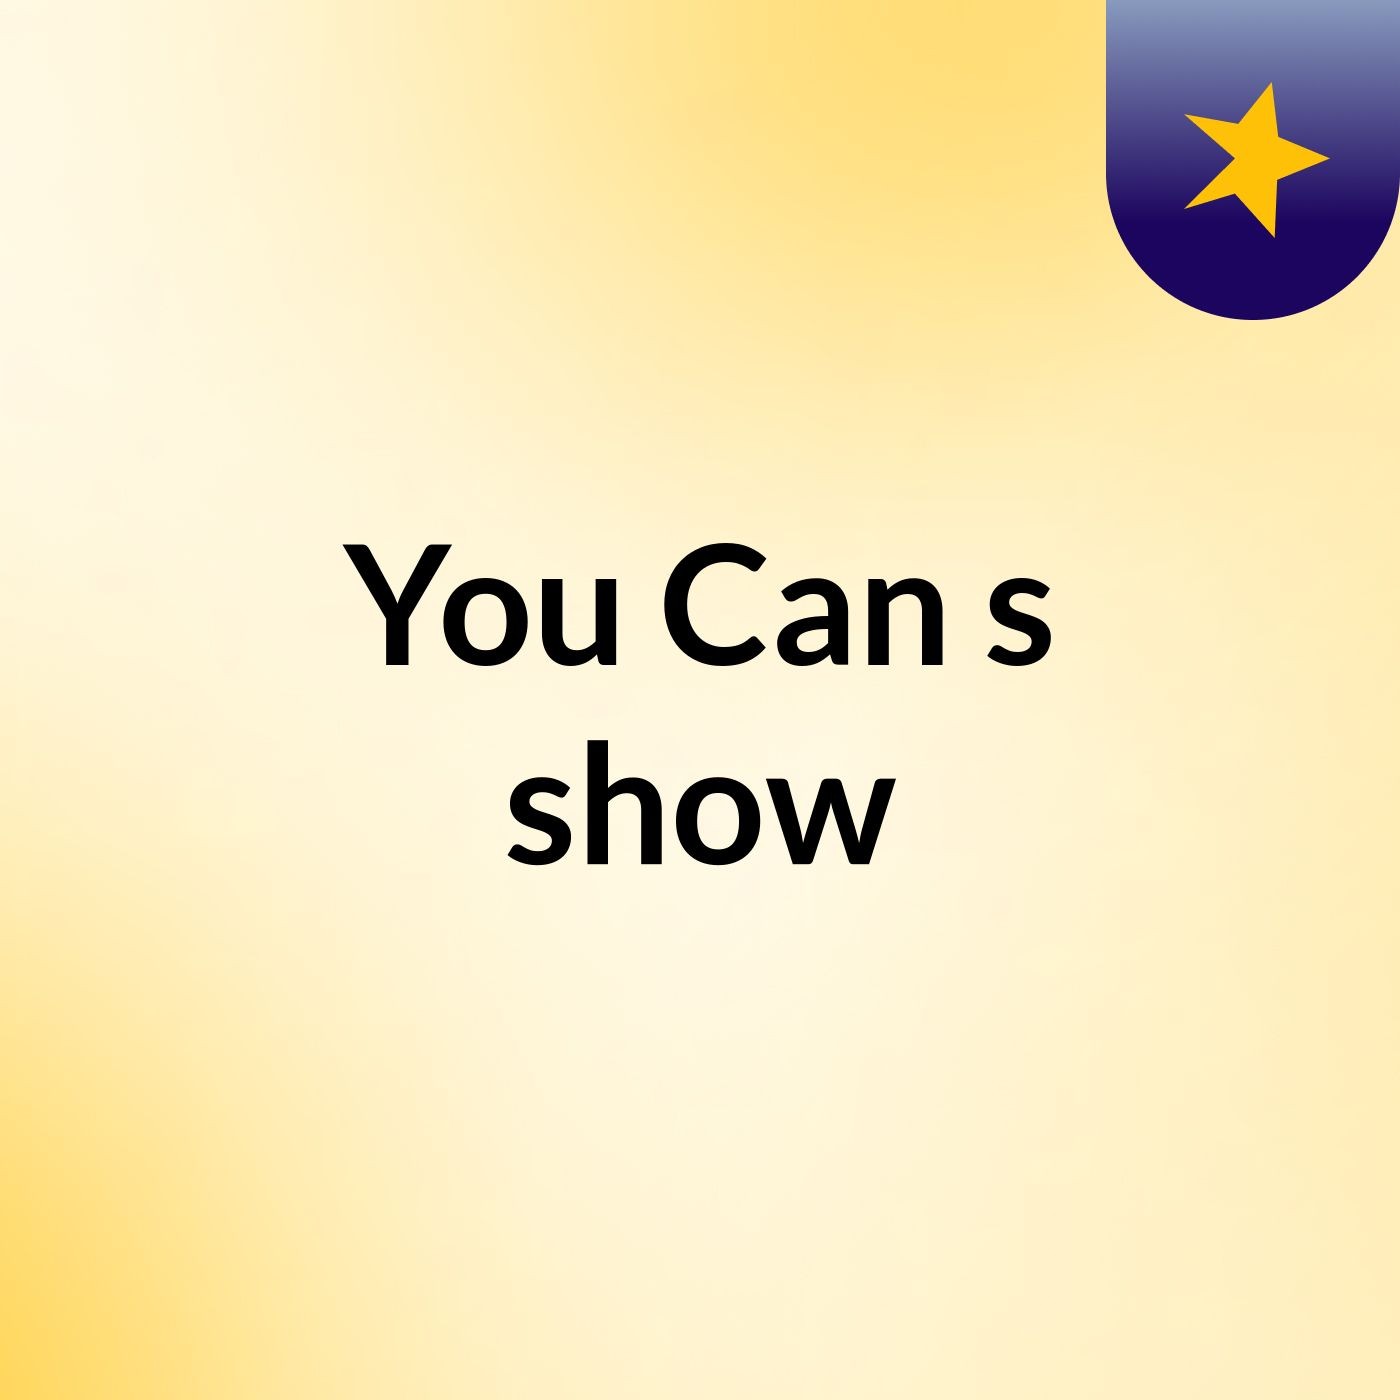 You Can's show